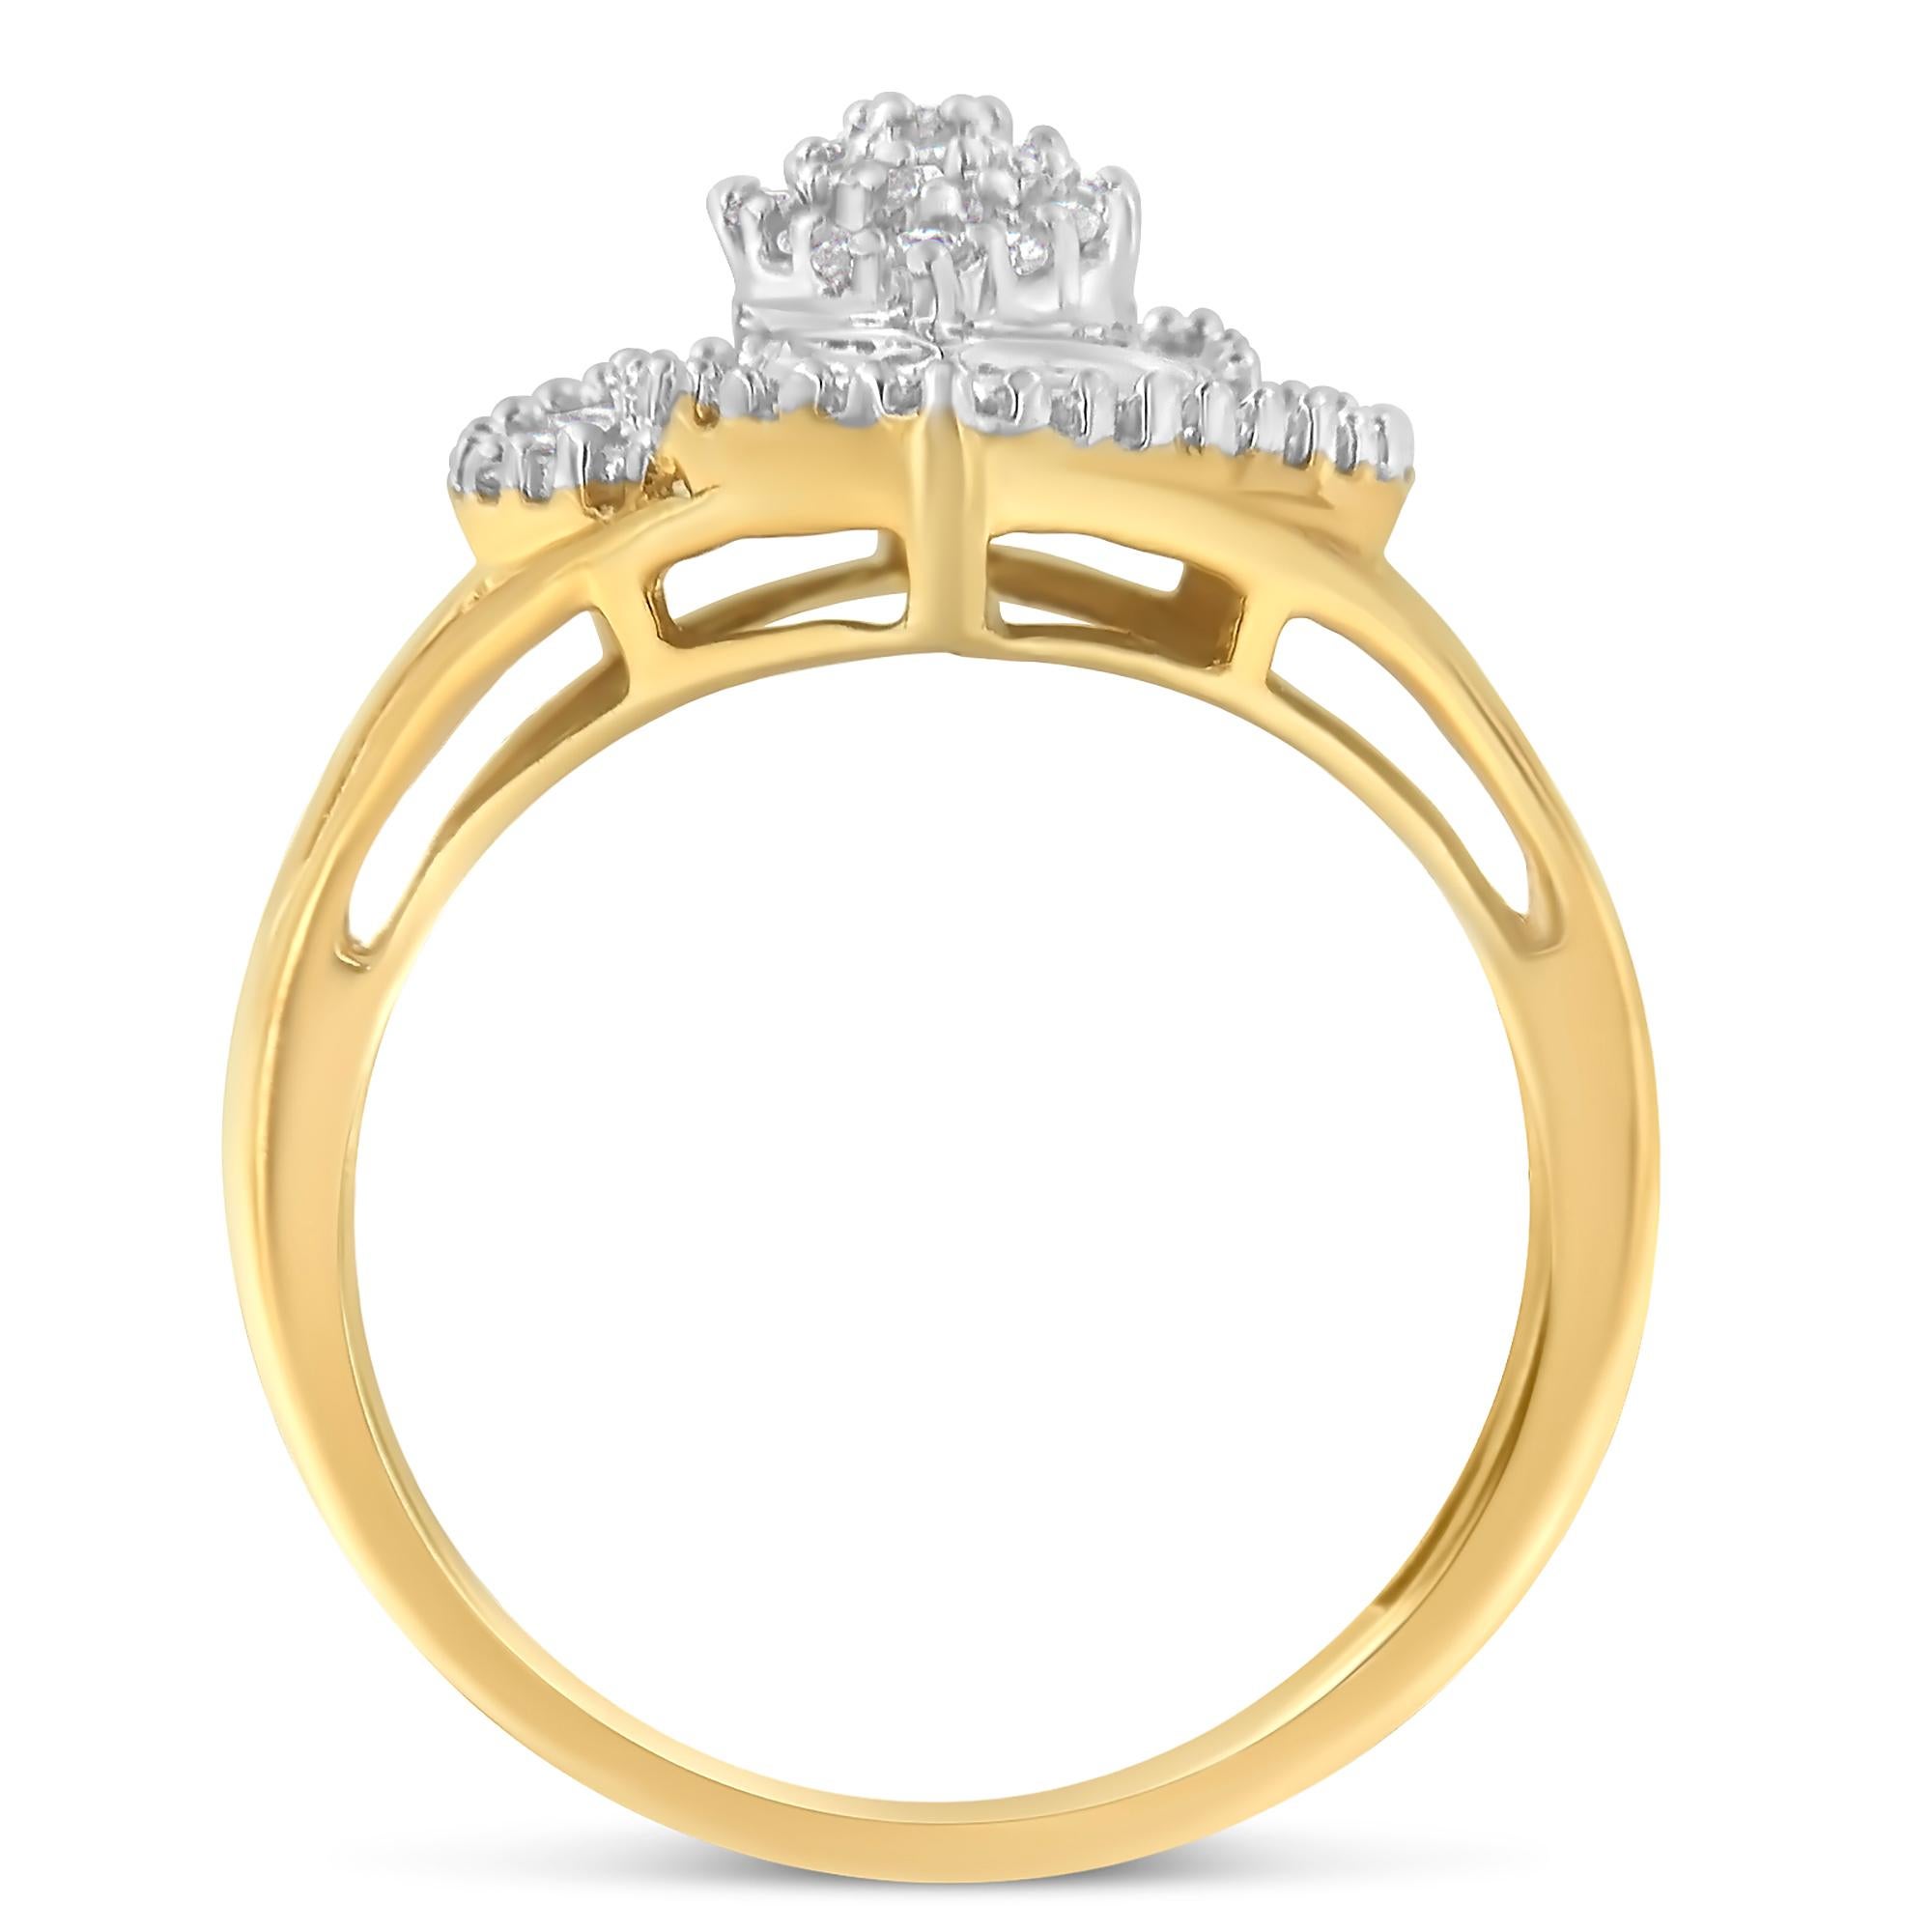 For Sale:  10K Yellow Gold 1/2 Carat Diamond Cocktail Ring 2